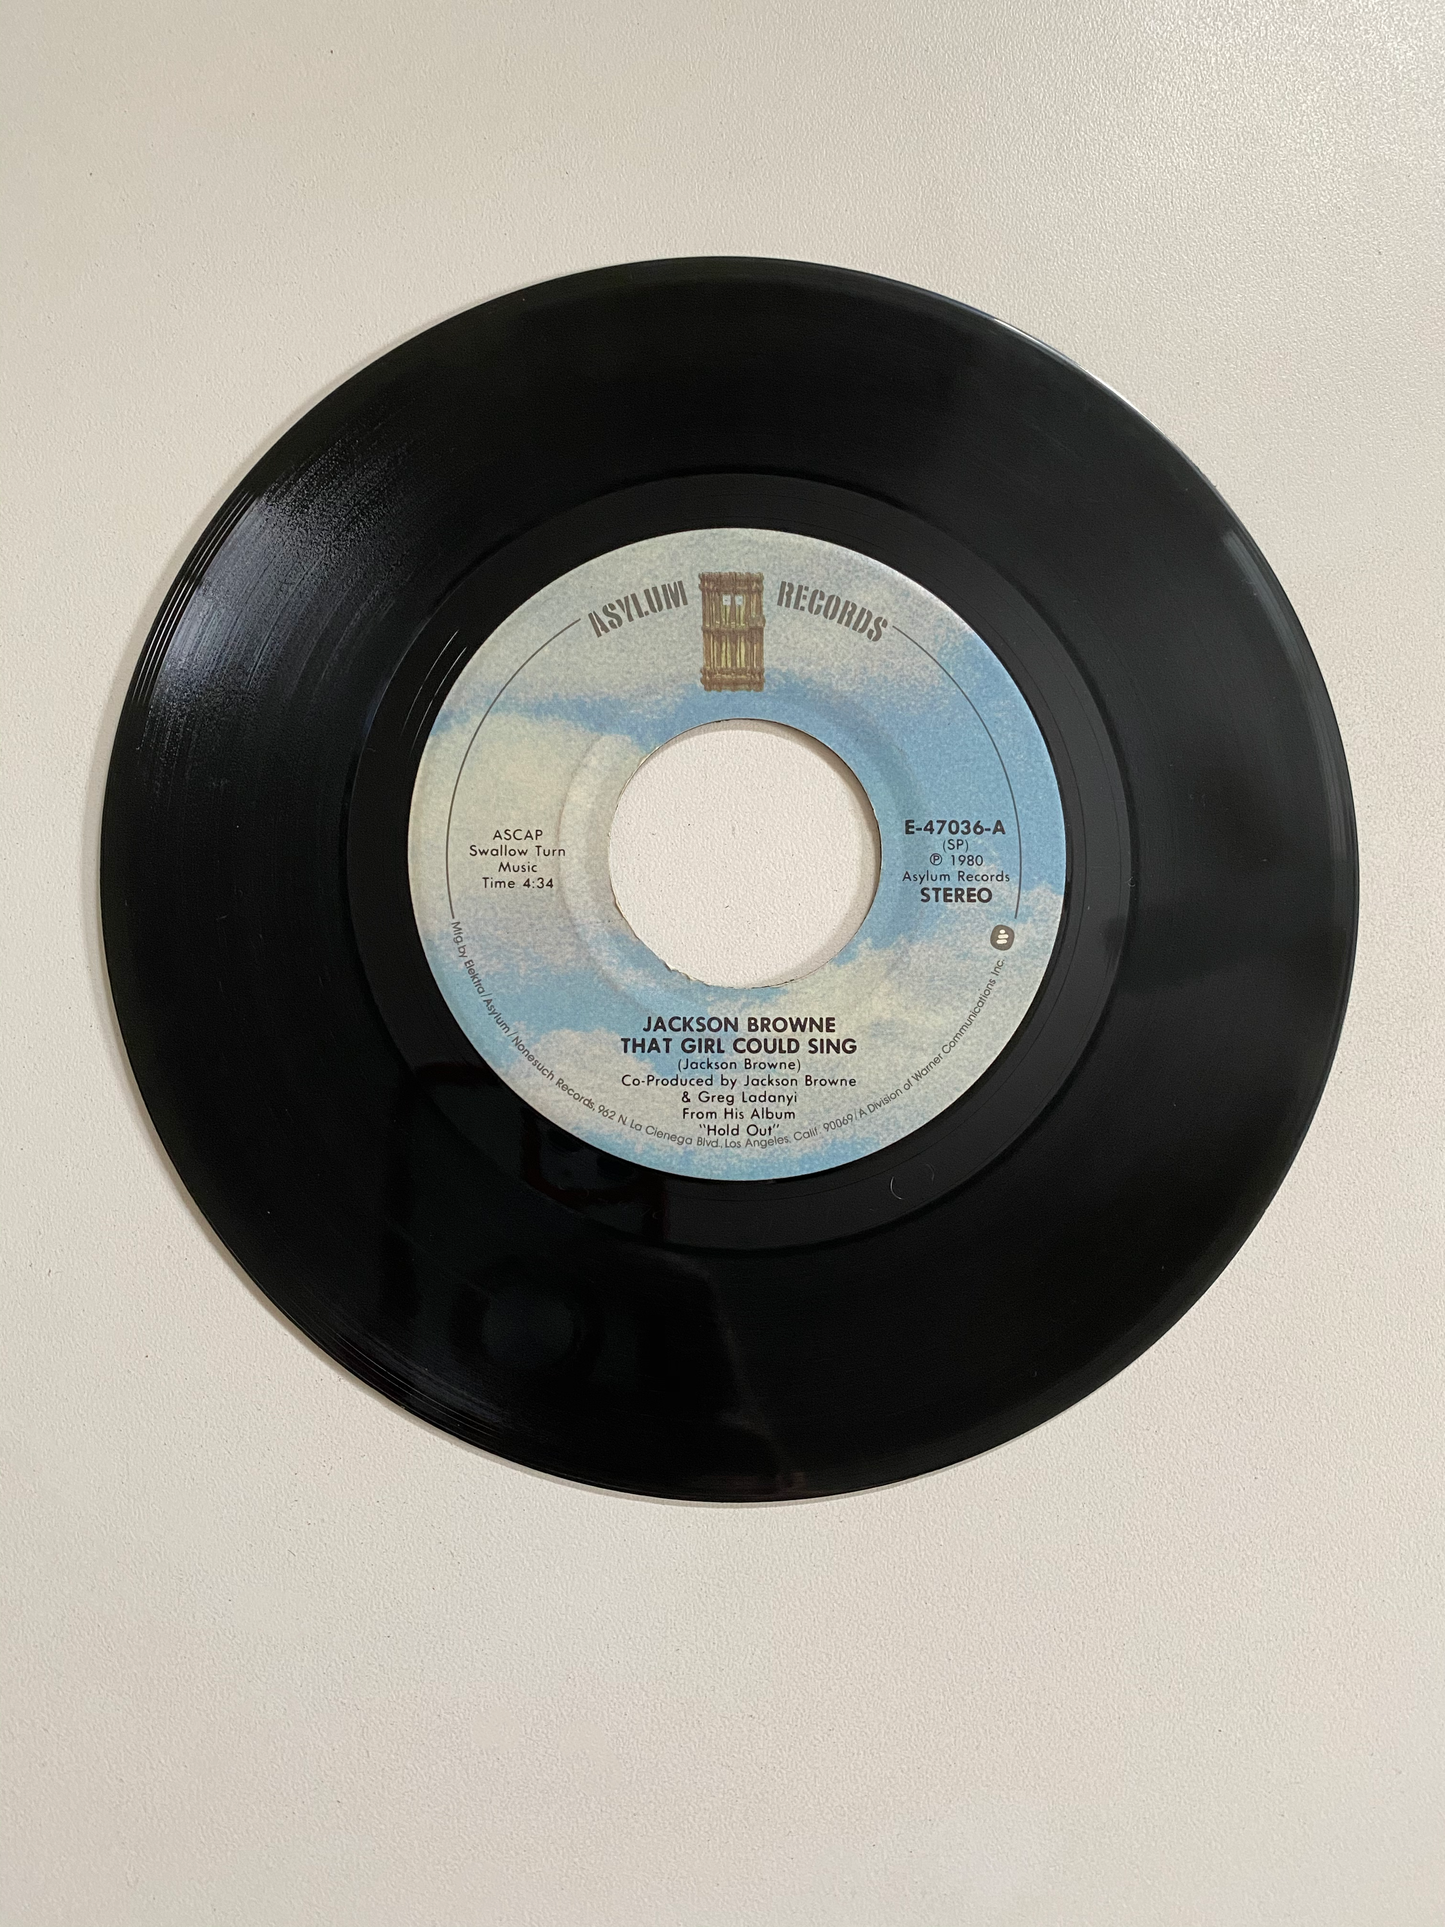 Jackson Browne - That Girl Could Sing | 45 The Vintedge Co.